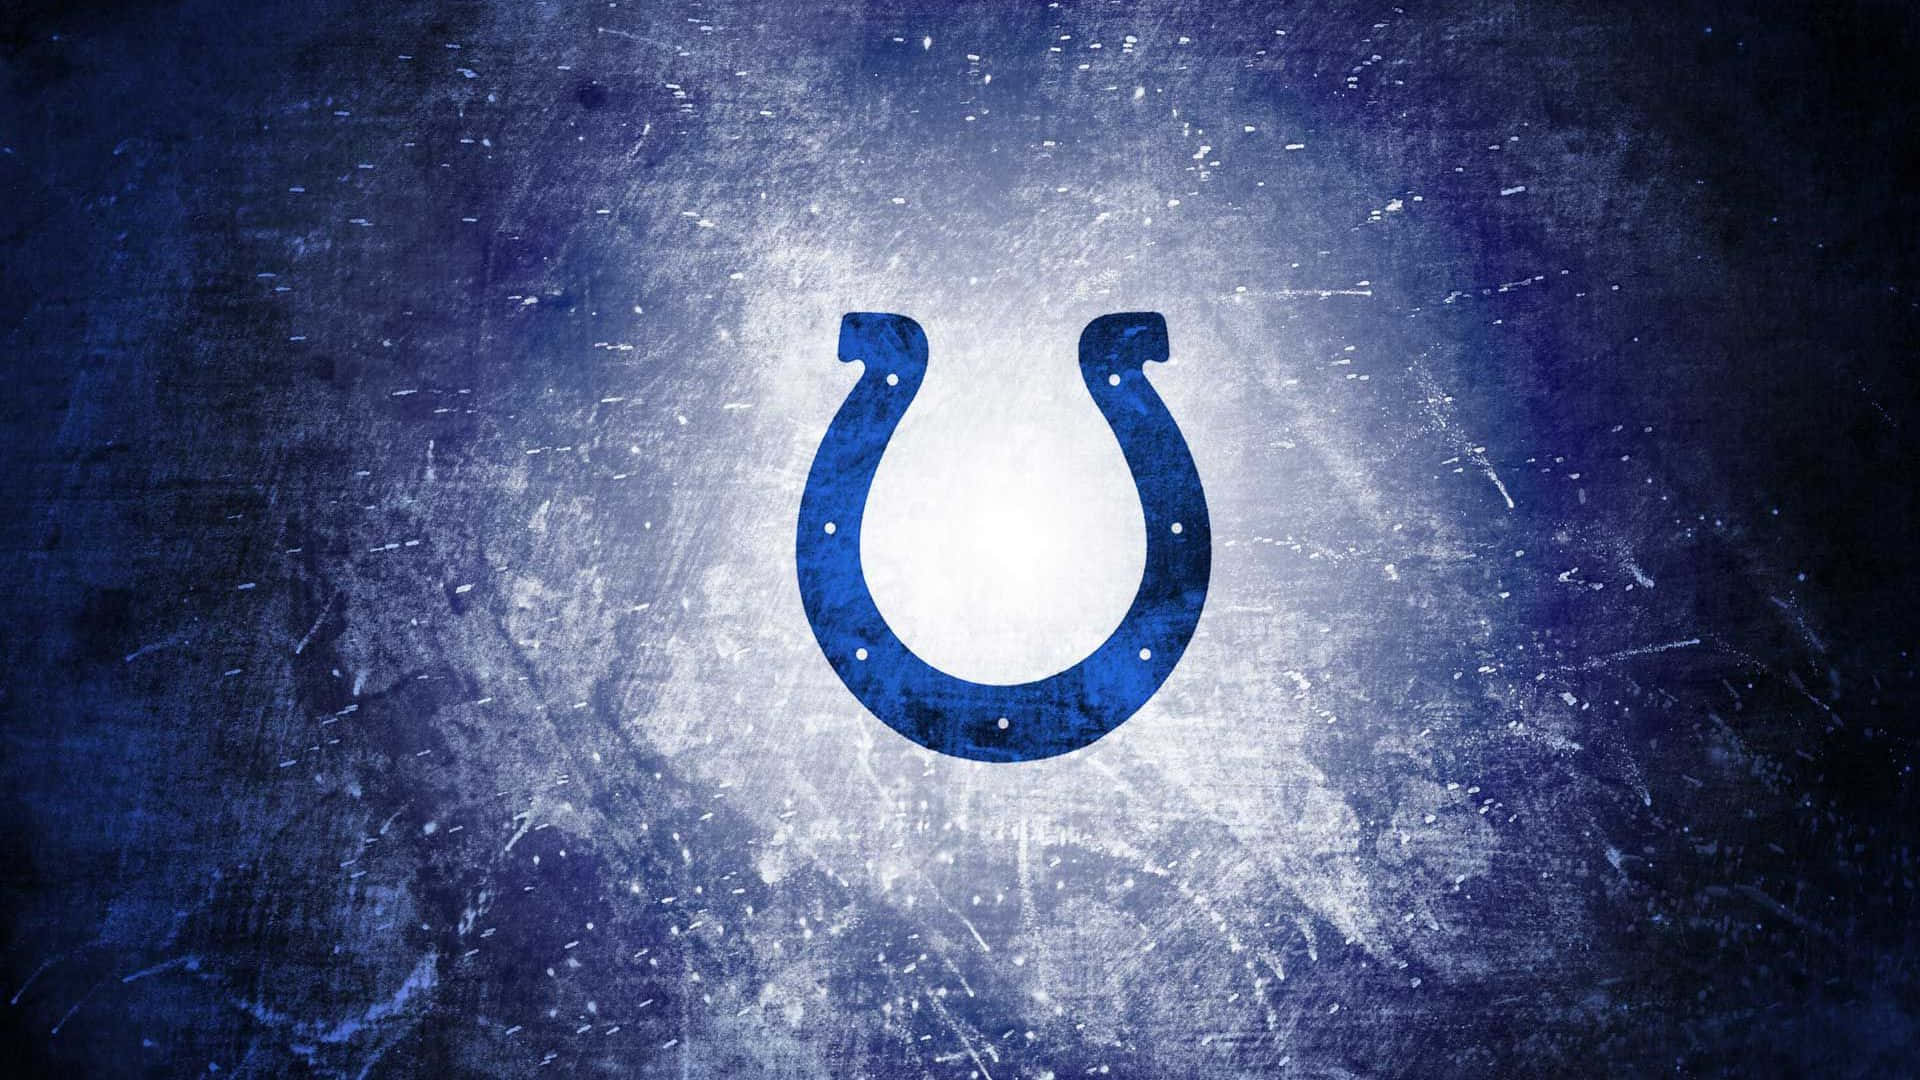 The Translation In Swedish: Colts Horseshoe Officiell Logotyp Wallpaper